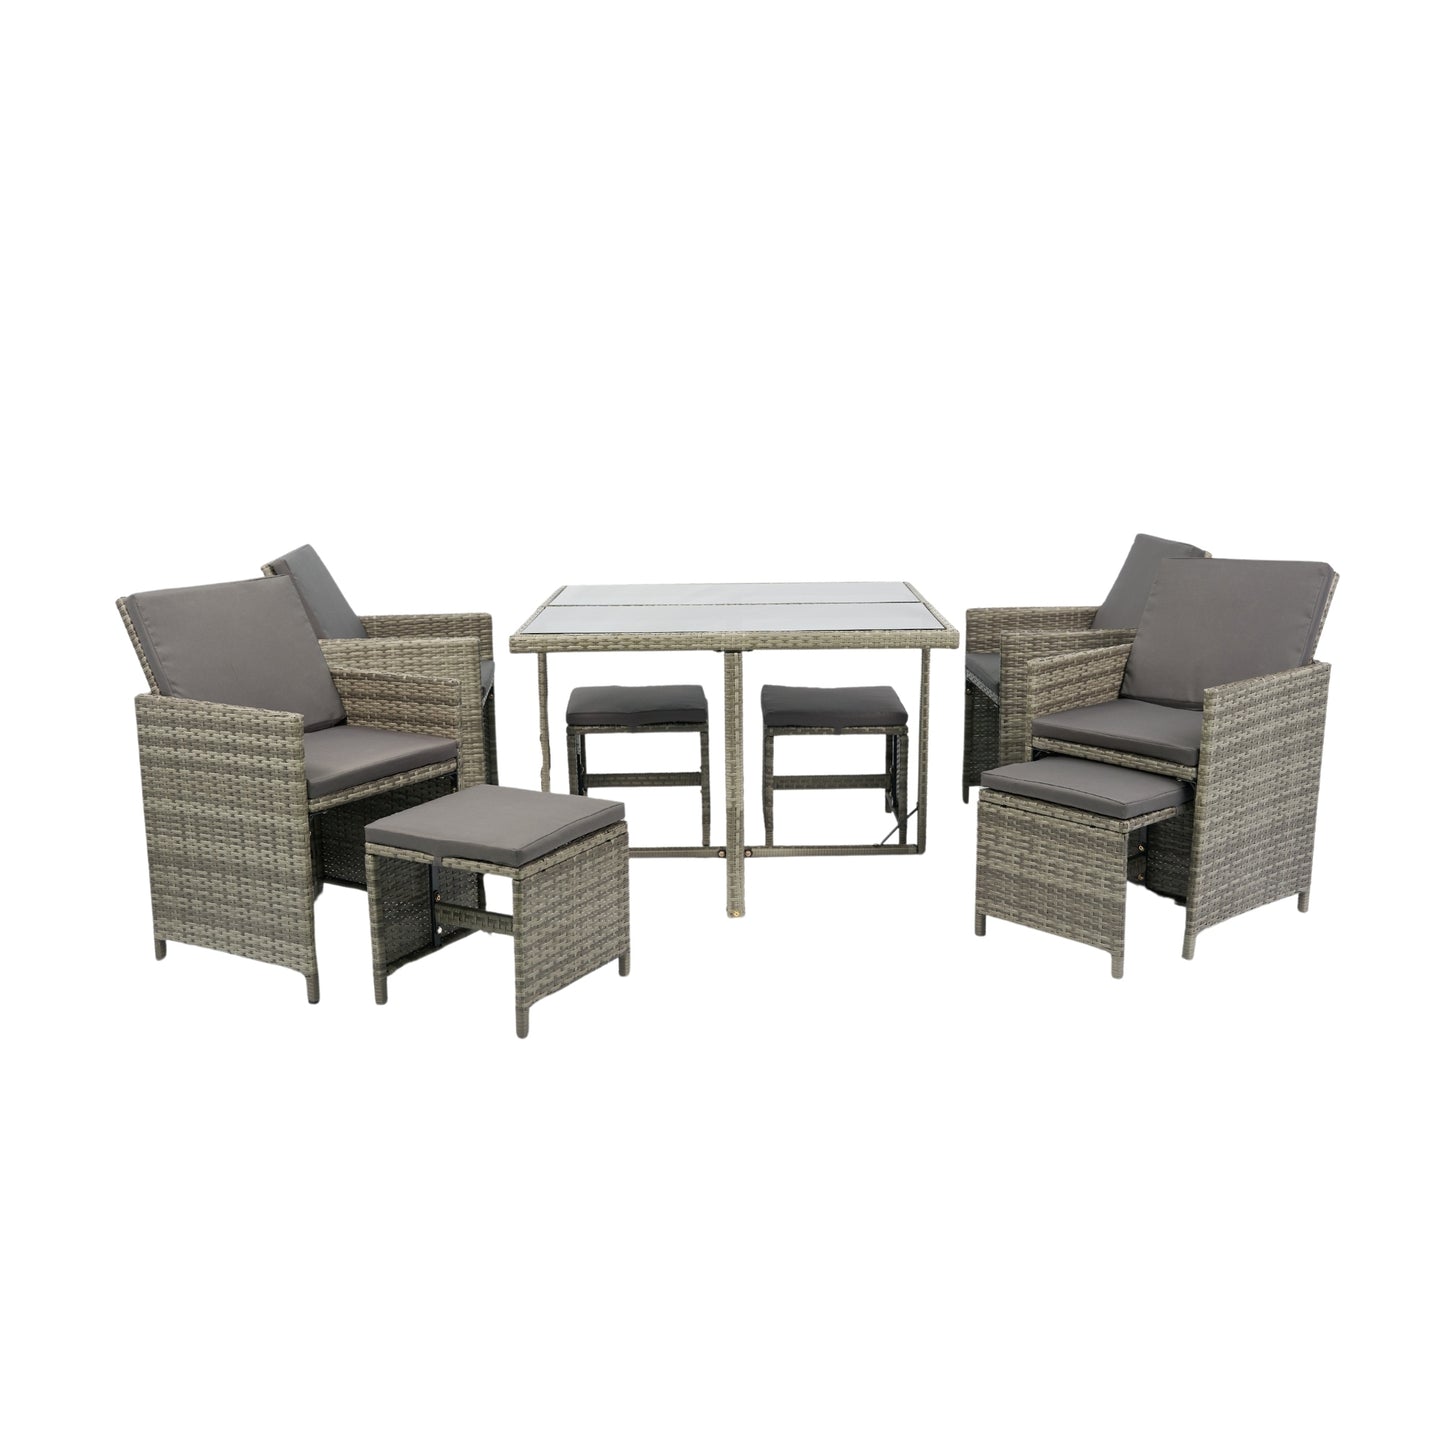 9 Pieces Patio Dining Sets Outdoor Space Saving, Glass Table